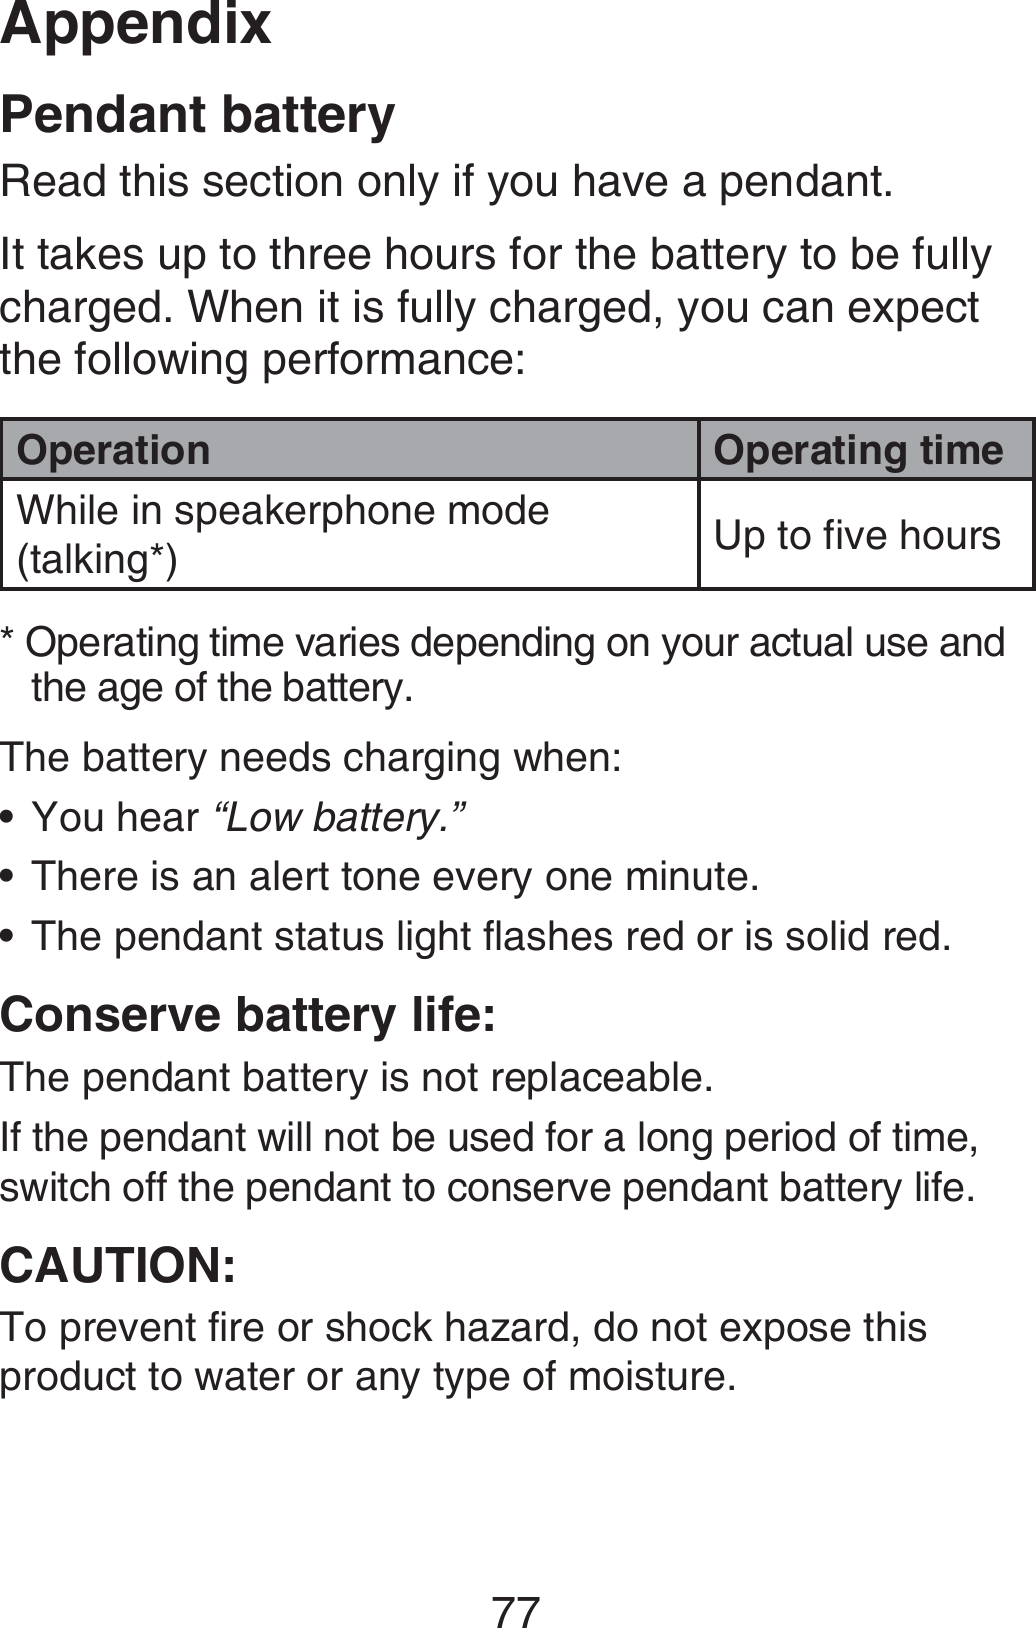 Appendix77Pendant batteryRead this section only if you have a pendant.It takes up to three hours for the battery to be fully charged. When it is fully charged, you can expect the following performance:Operation Operating timeWhile in speakerphone mode (talking*) Up to five hours* Operating time varies depending on your actual use and    the age of the battery.The battery needs charging when:You hear “Low battery.”There is an alert tone every one minute.The pendant status light flashes red or is solid red.Conserve battery life:The pendant battery is not replaceable.If the pendant will not be used for a long period of time, switch off the pendant to conserve pendant battery life.CAUTION:To prevent fire or shock hazard, do not expose this product to water or any type of moisture.•••